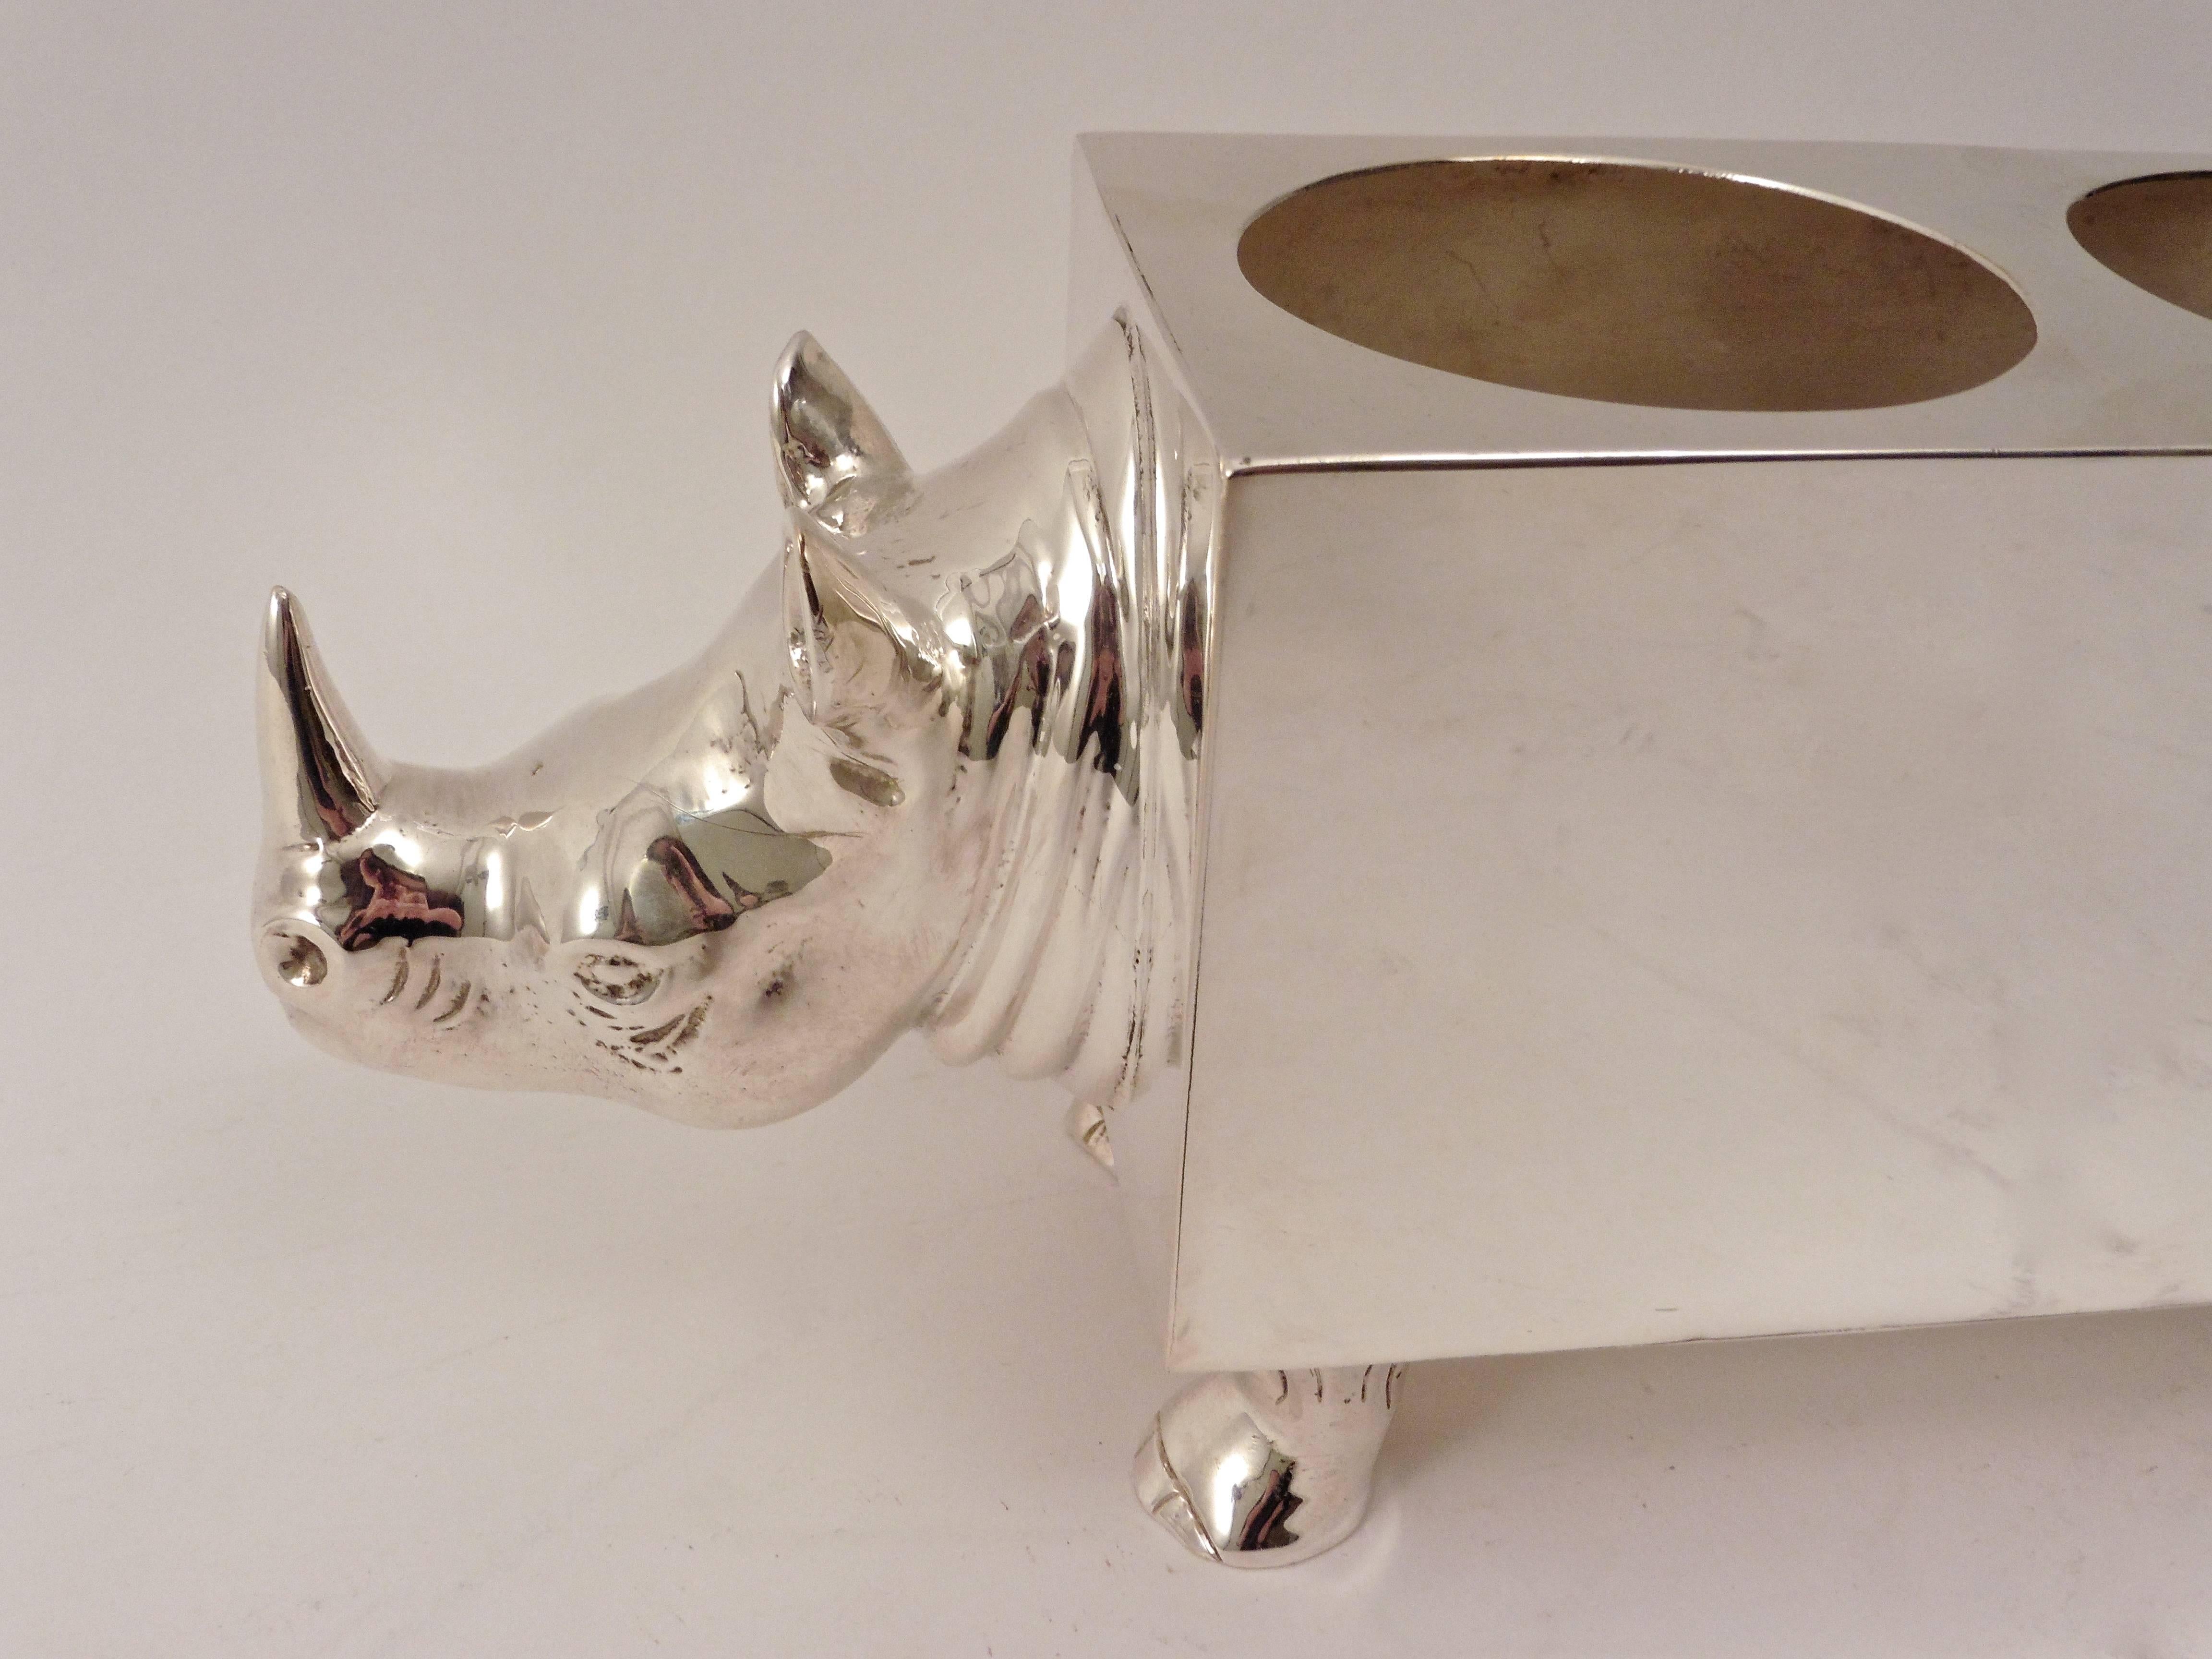 An unusual 20th century silver plate Spanish double wine holder in the shape of a Rhinoceros. The rectangular body a stark contrast to the realistic form of the head, tail and feet.